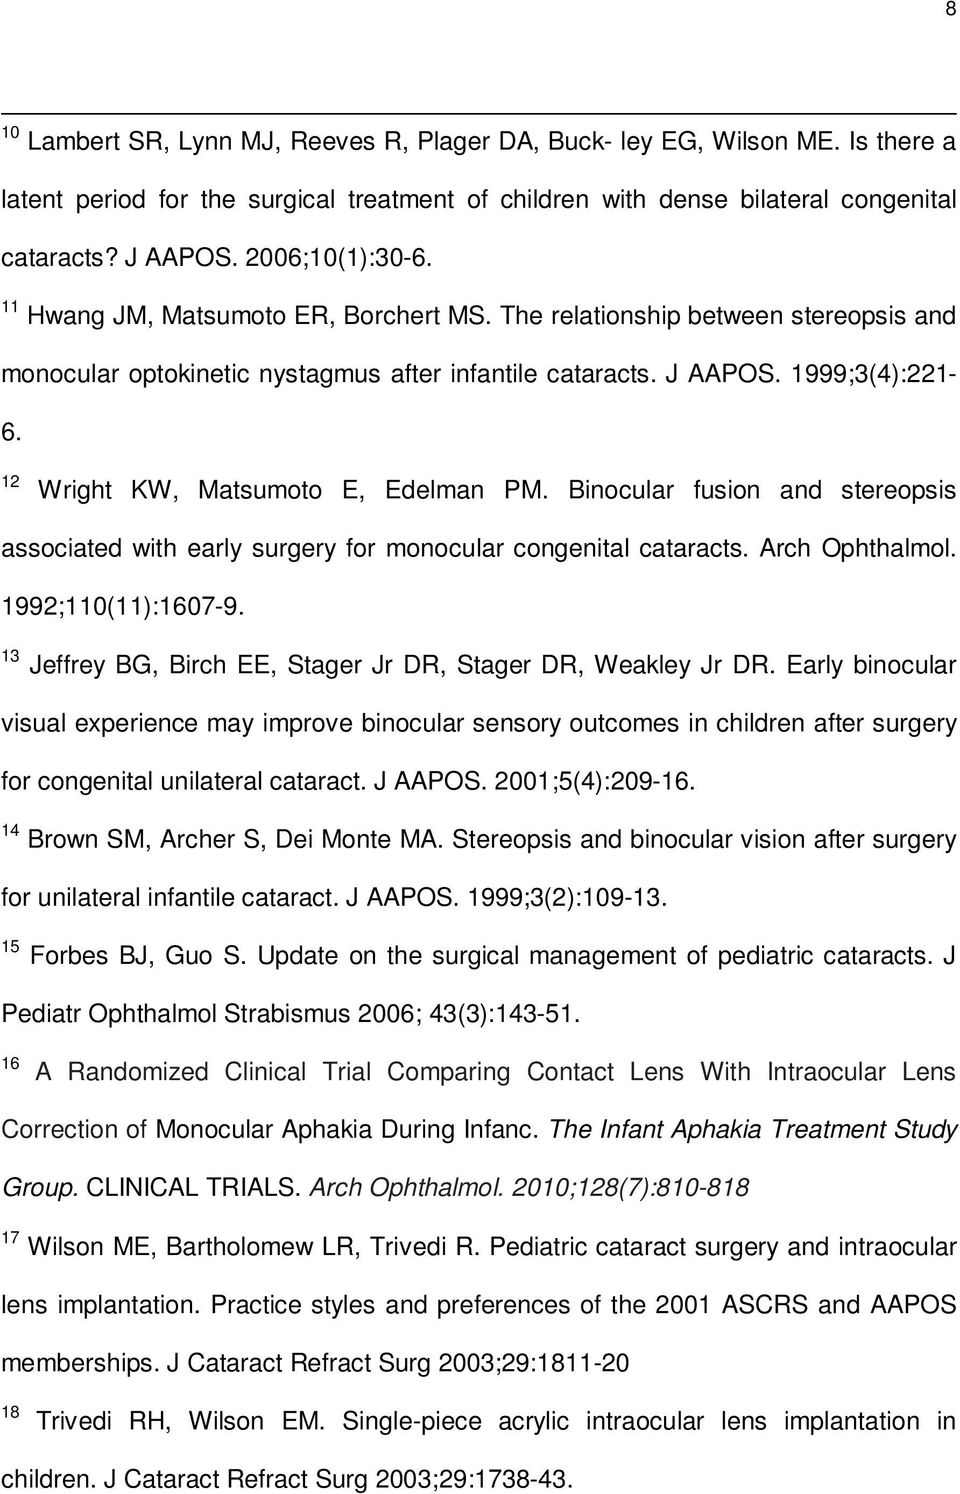 12 Wright KW, Matsumoto E, Edelman PM. Binocular fusion and stereopsis associated with early surgery for monocular congenital cataracts. Arch Ophthalmol. 1992;110(11):1607-9.